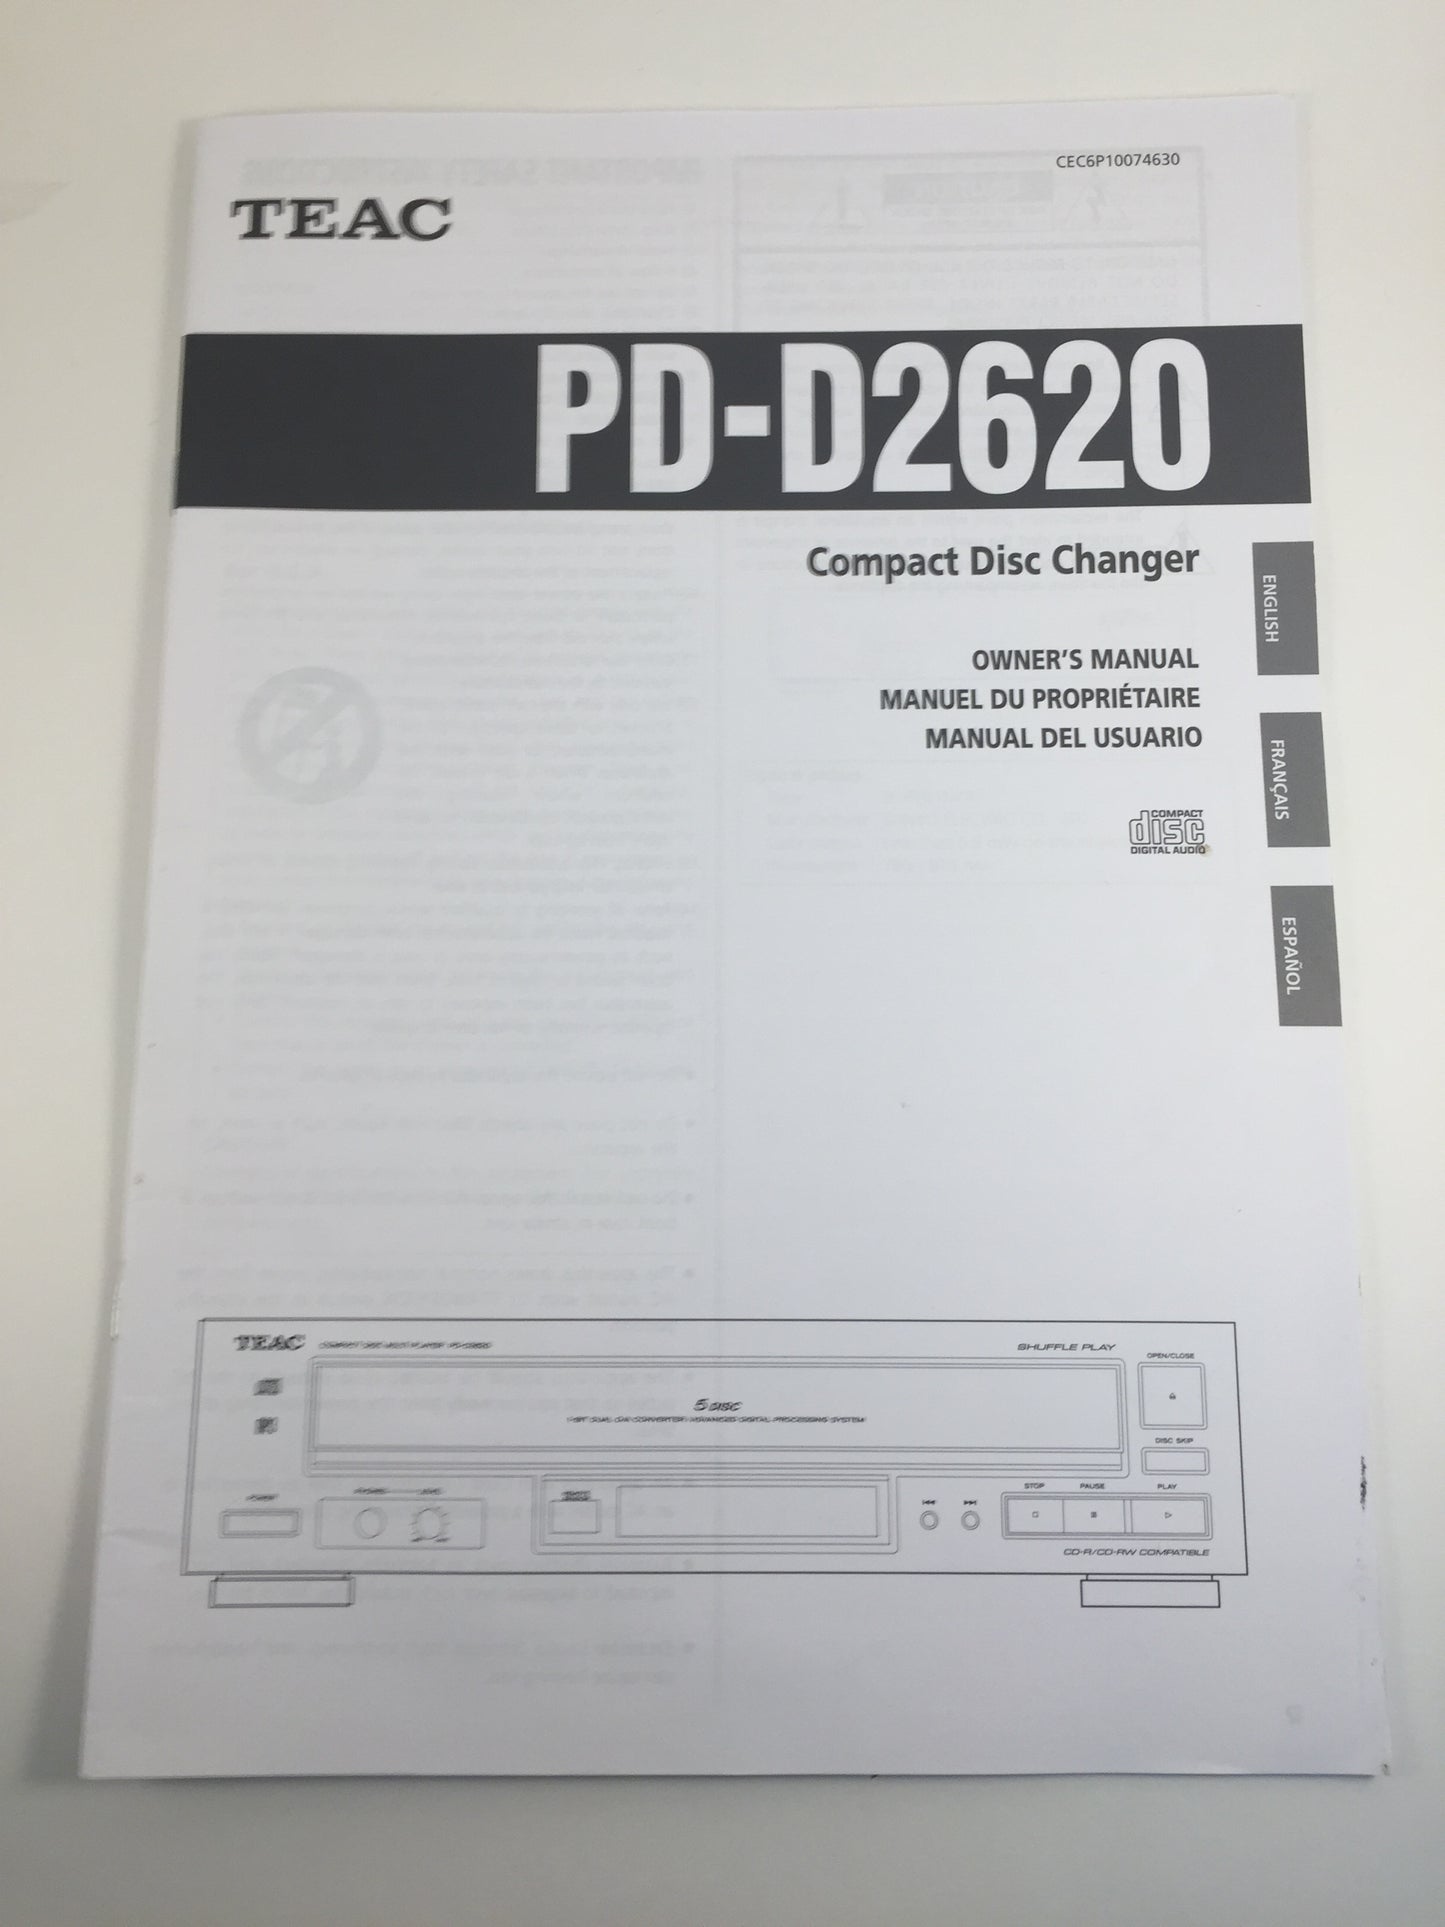 Teac PD-D2620 Compact Disc Changer Owner's Manual